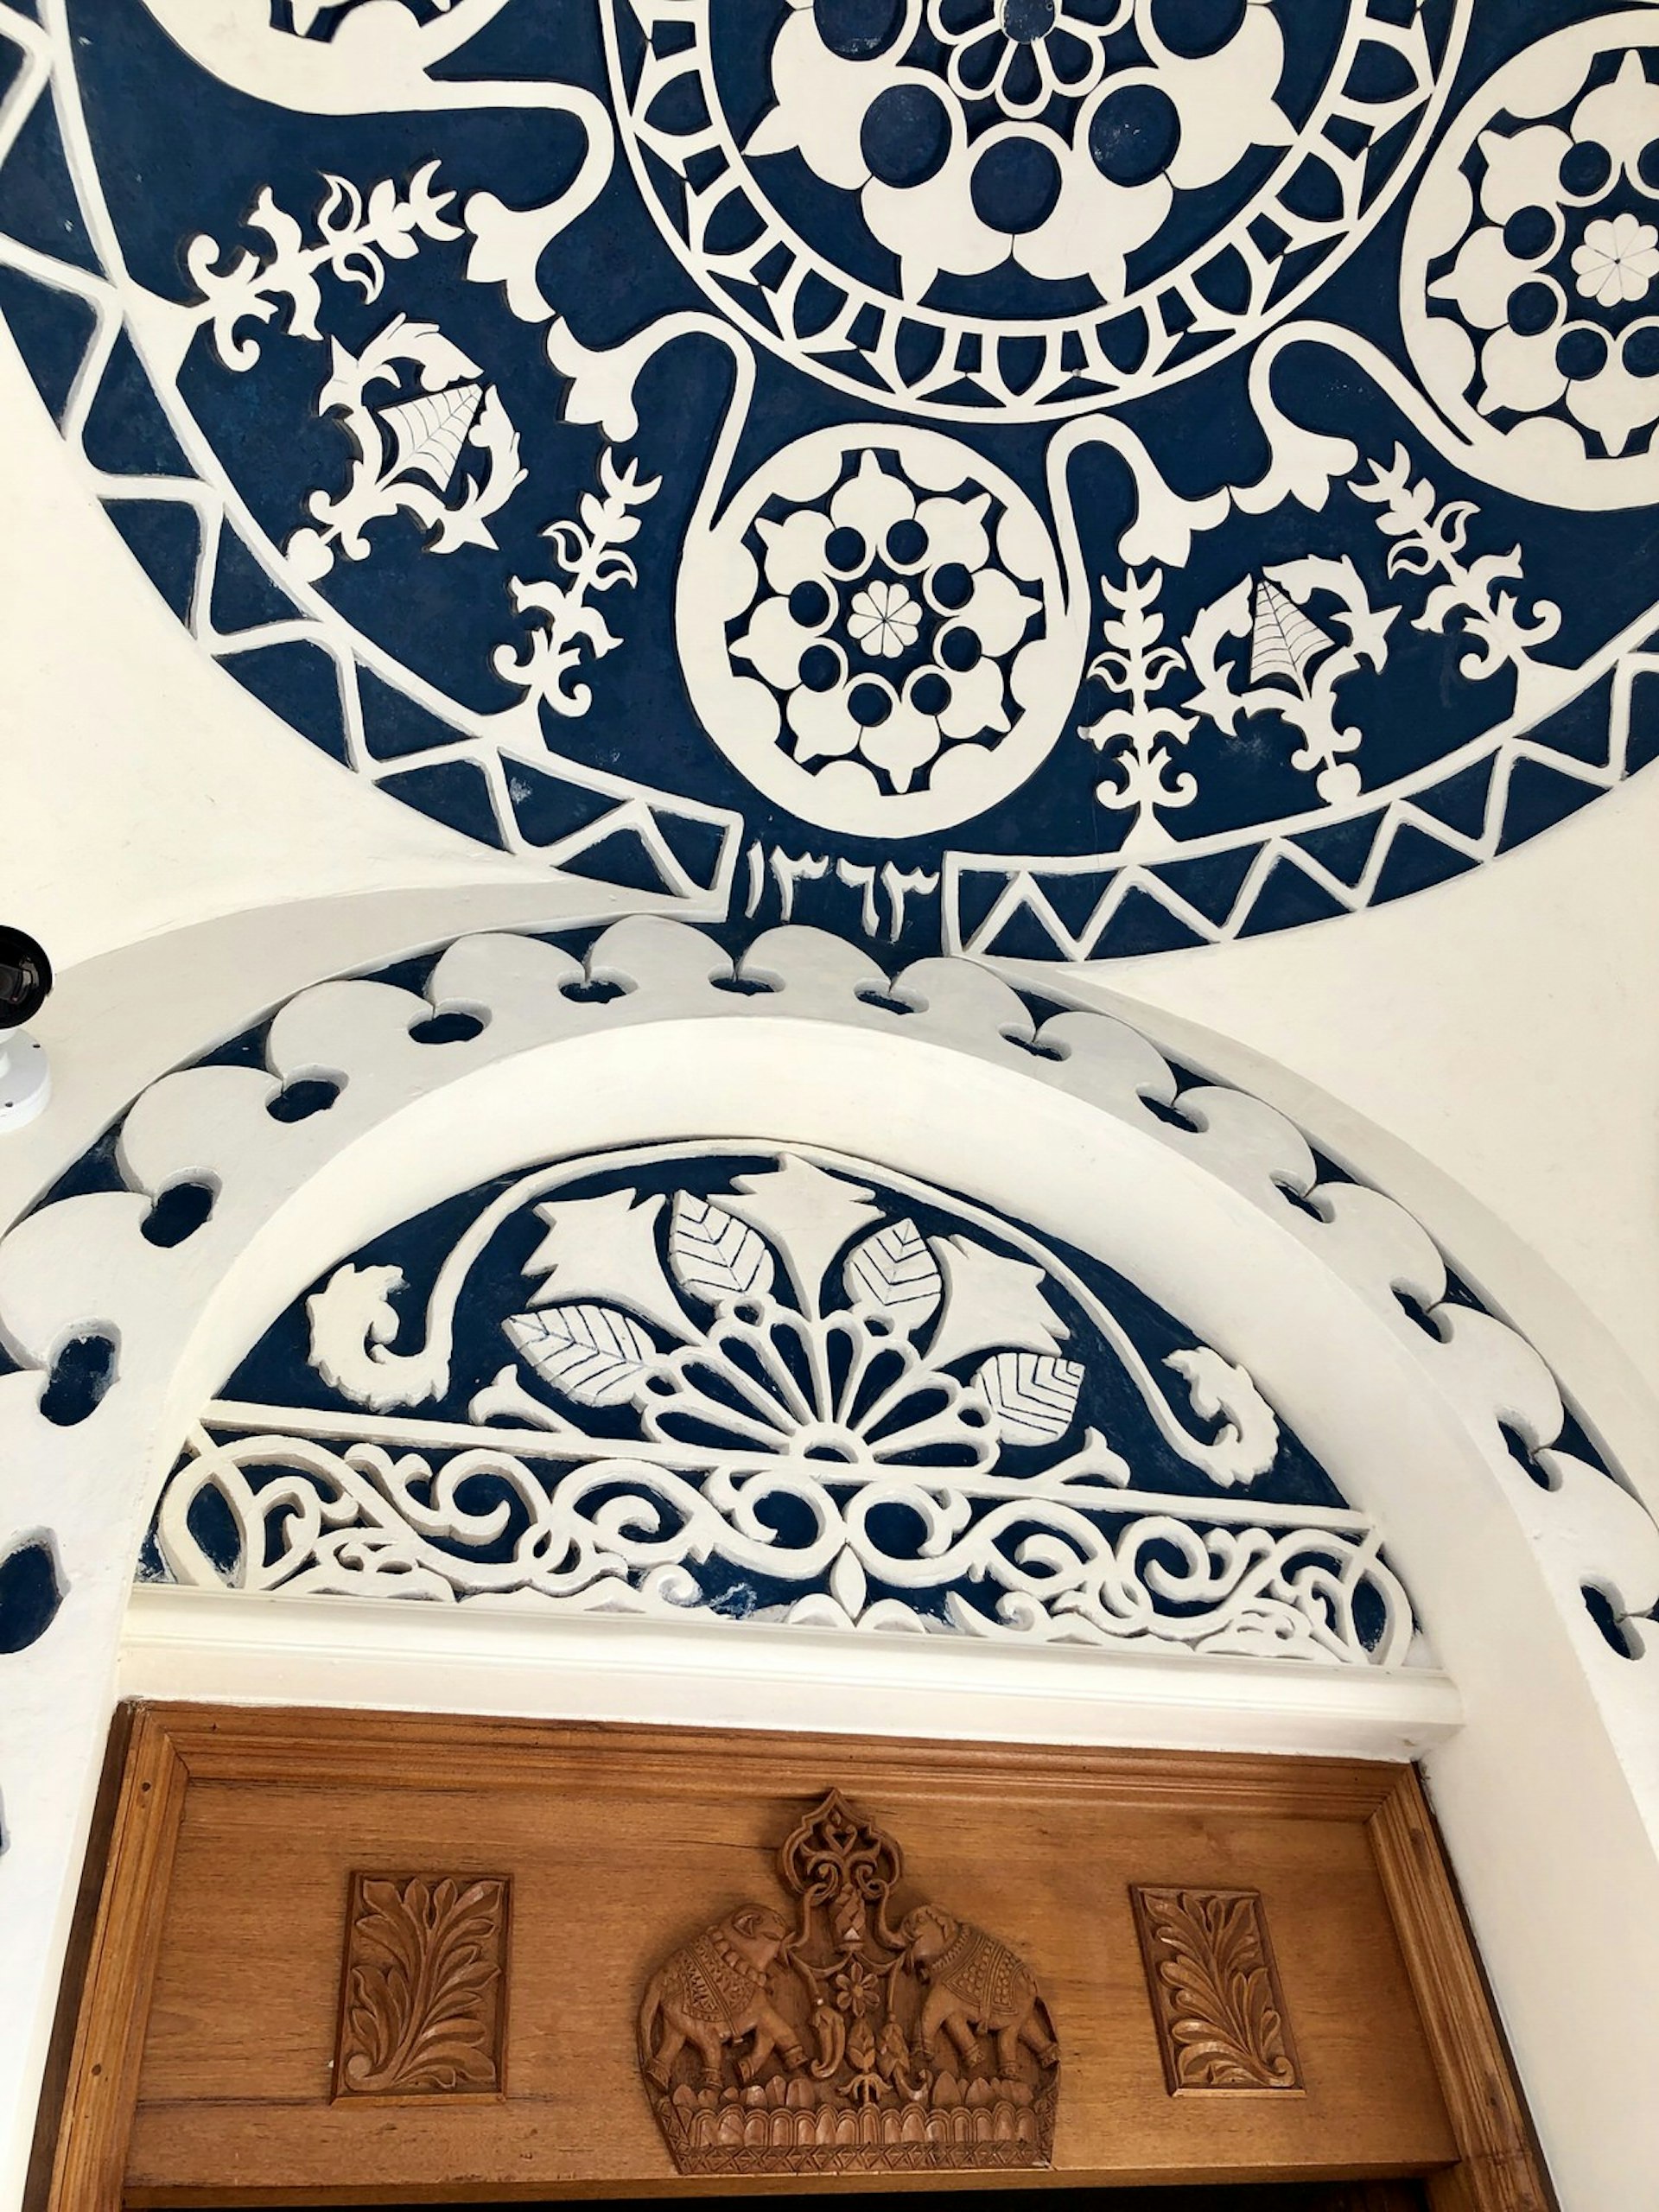 Traditional Indian and Middle Eastern designs and architecture above a door at Al Bait, Sharjah, United Arab Emirates